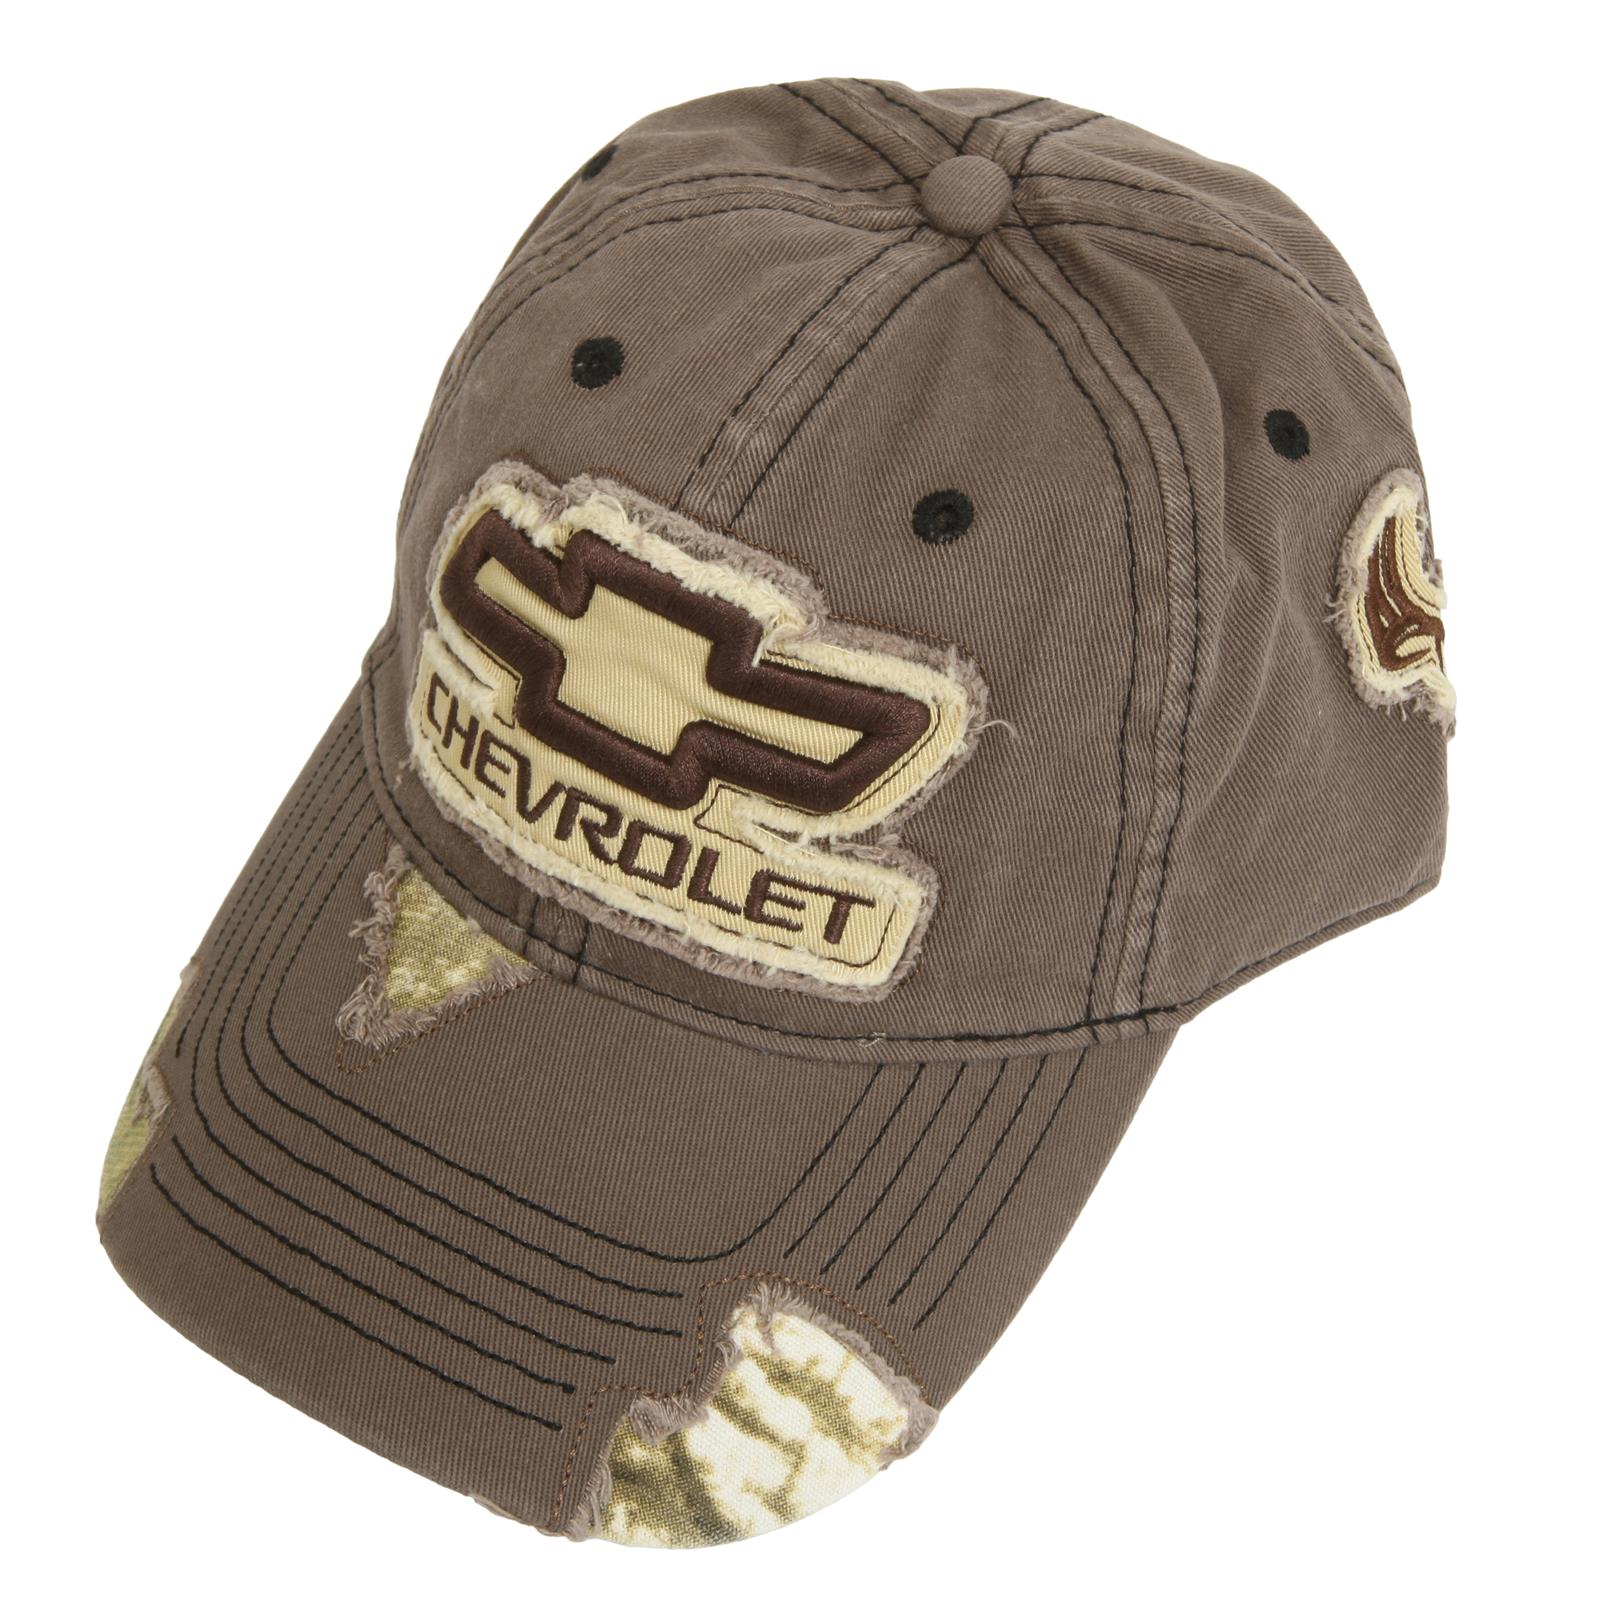 Summit Gifts GB120: Chevy Camo Cap